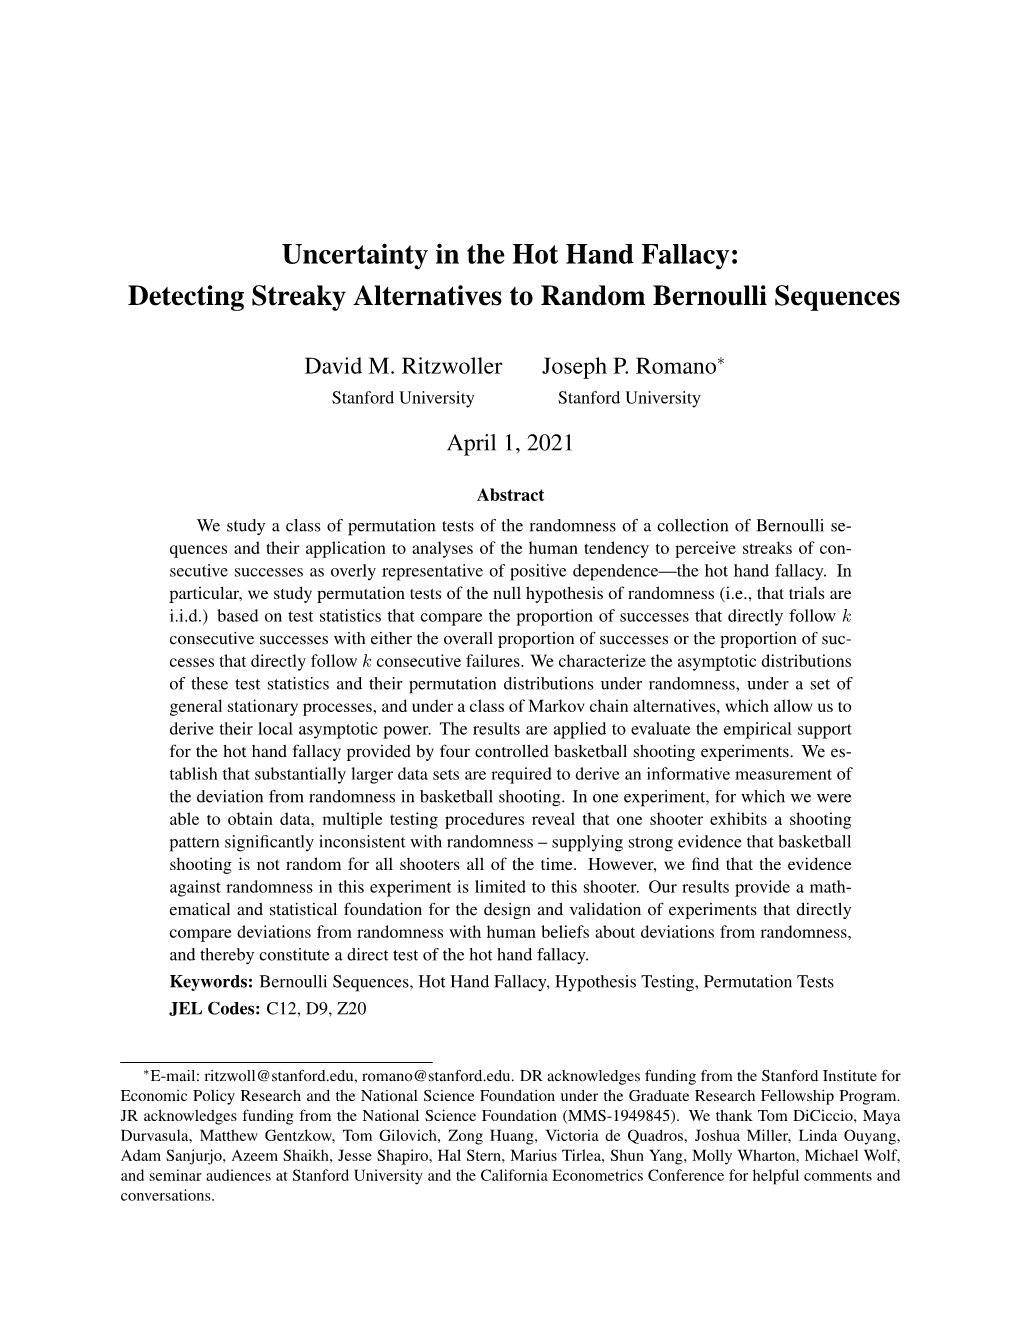 Uncertainty in the Hot Hand Fallacy: Detecting Streaky Alternatives to Random Bernoulli Sequences